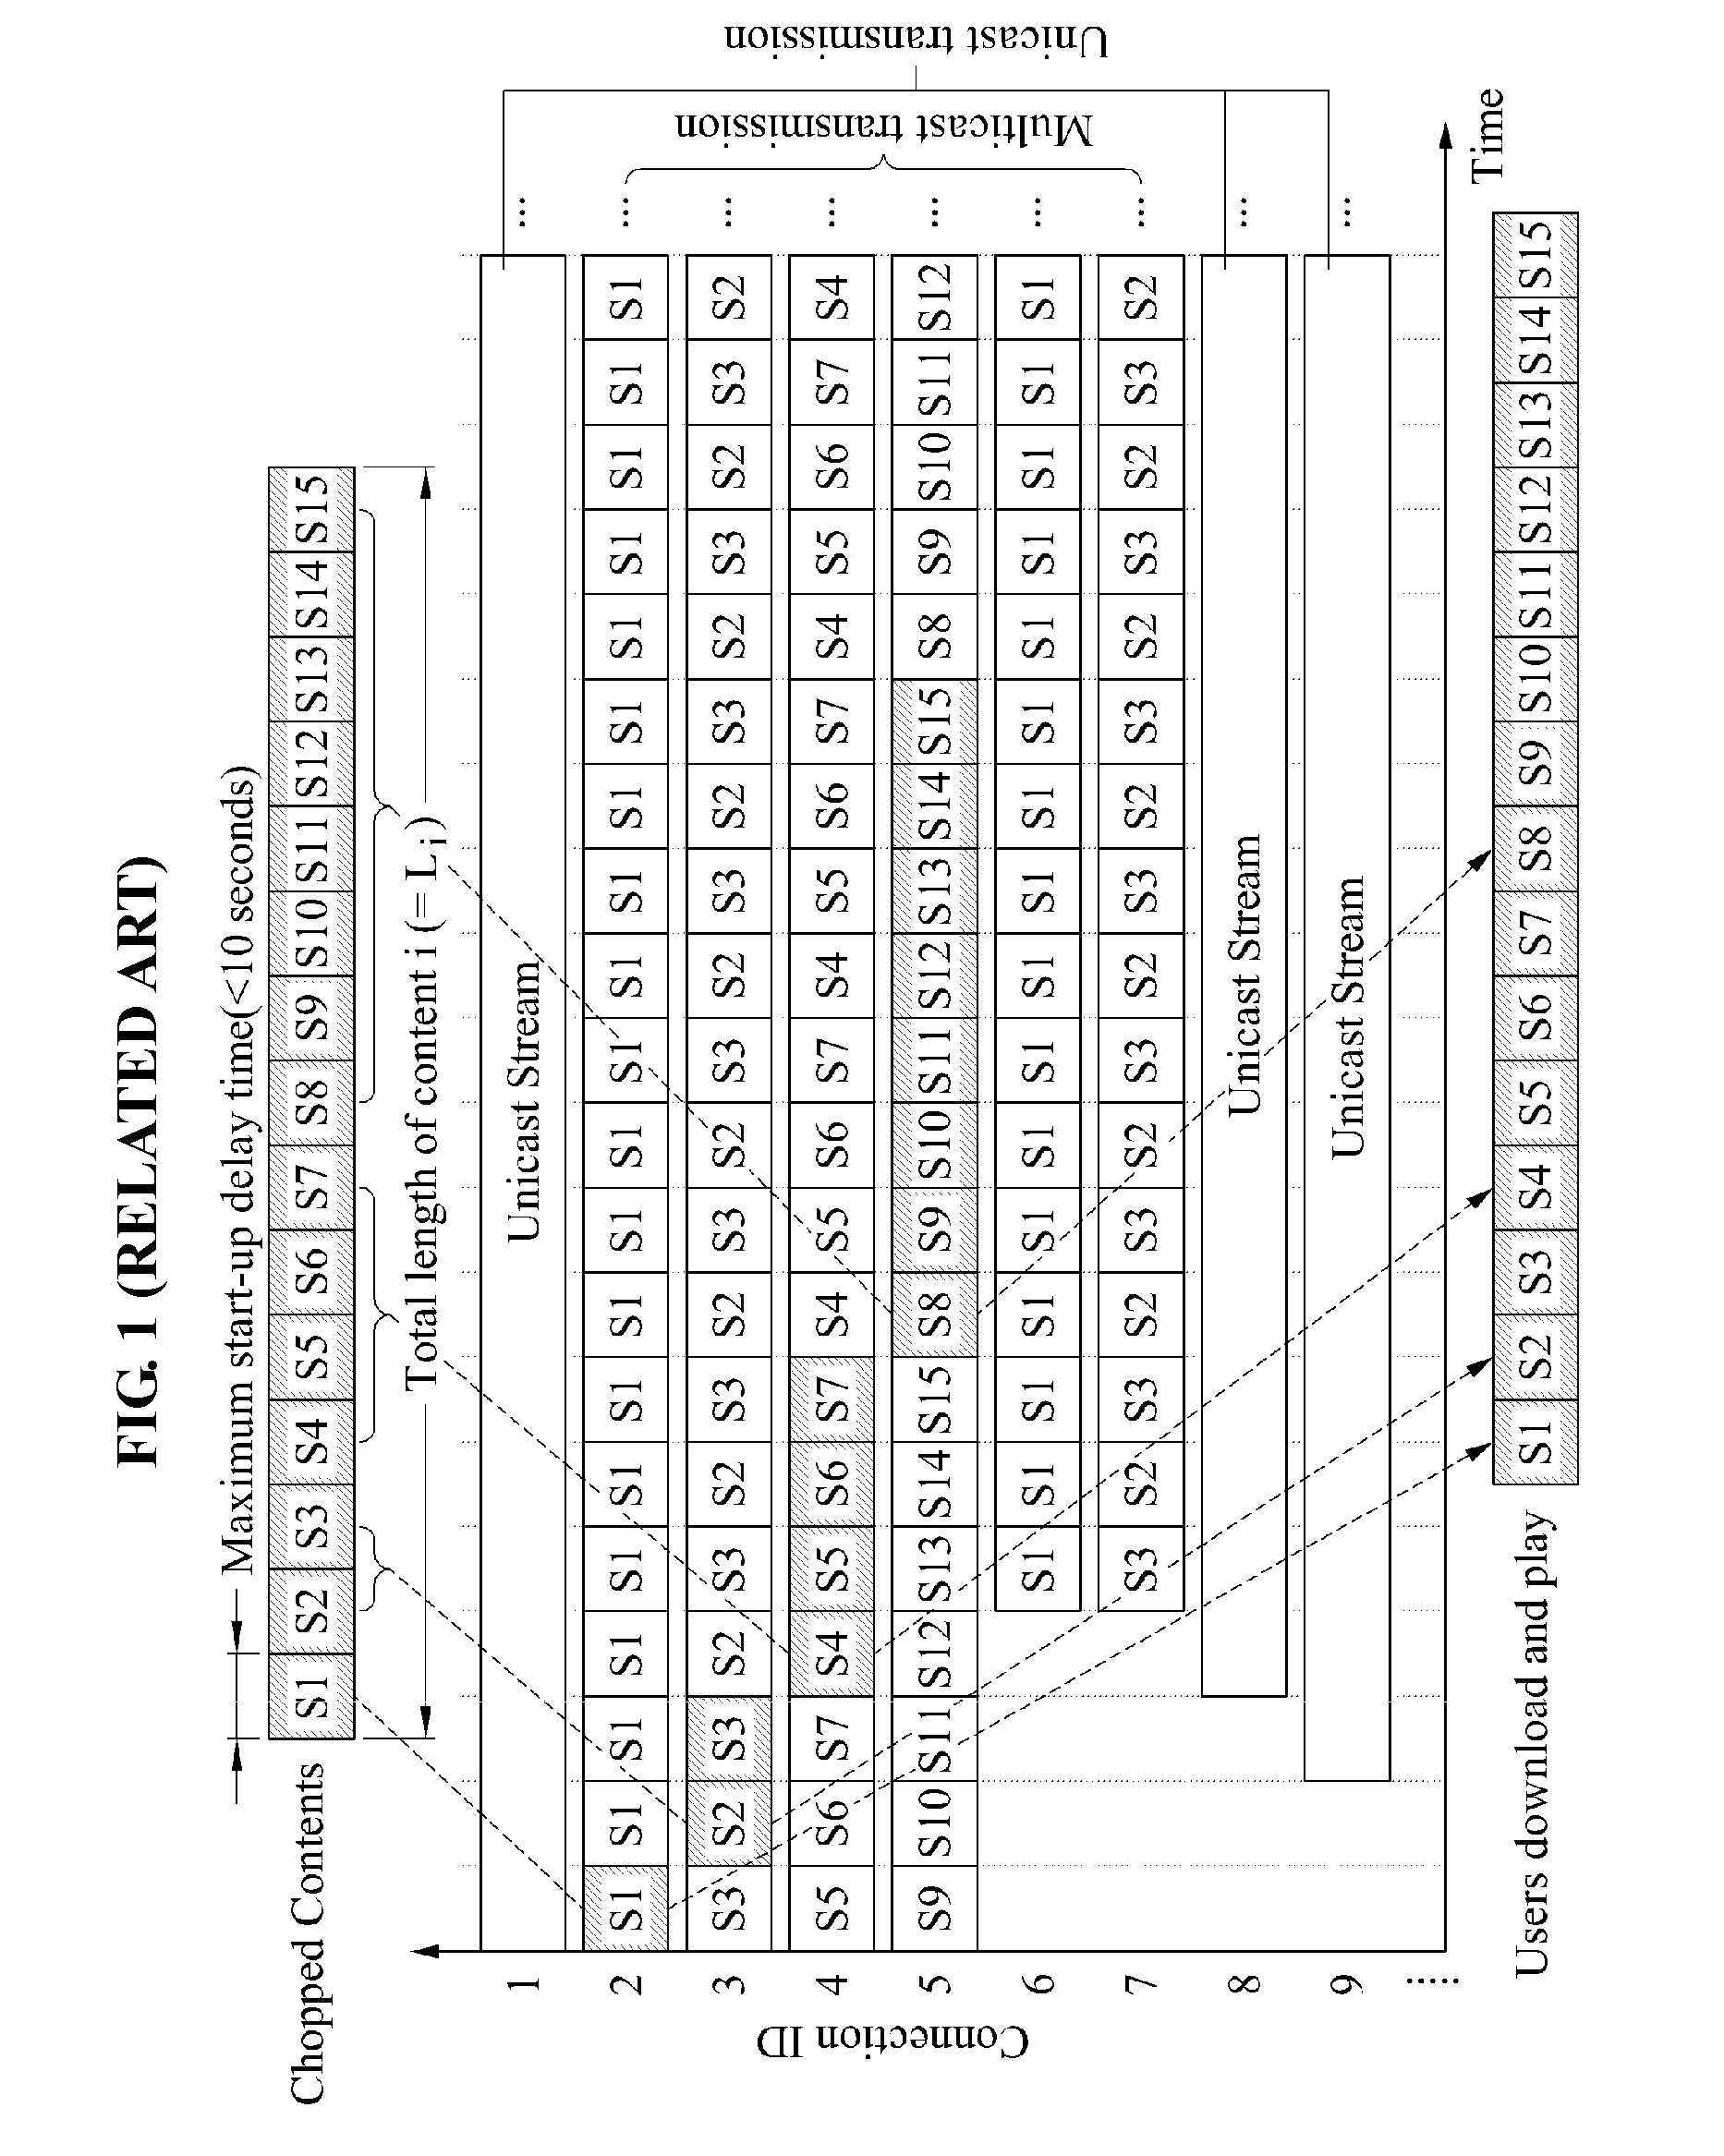 System and method of providing efficient video-on-demand service using unicast/multicast in internet protocol network